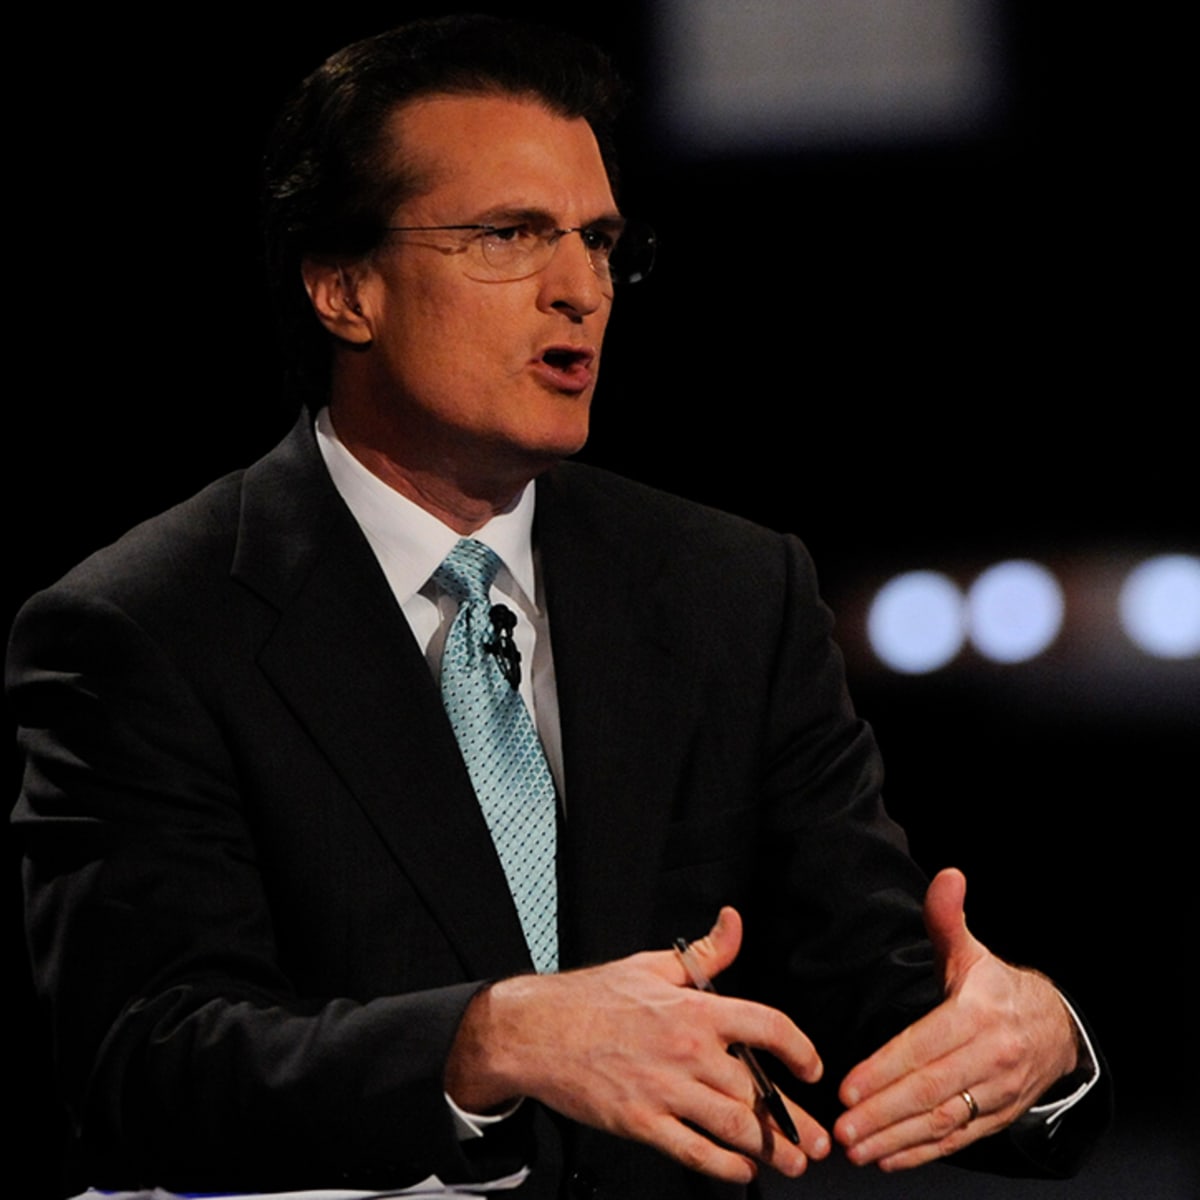 Unvaccinated Mel Kiper Jr. will cover NFL Draft 2022 remotely